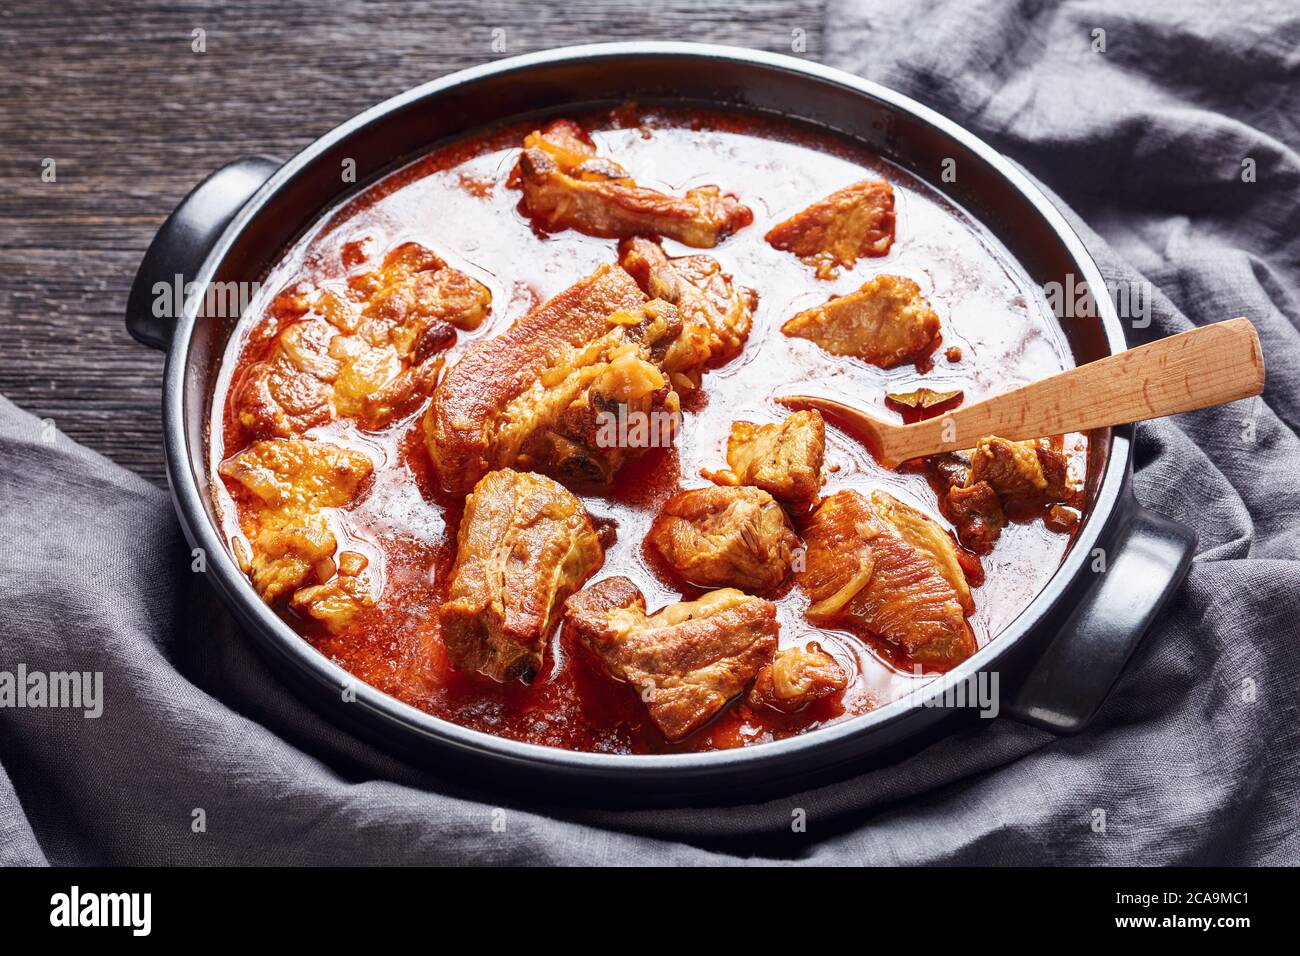 braised pork brisket chunks in a black dutch oven on a dark wooden table, landscape view from above, close-up Stock Photo